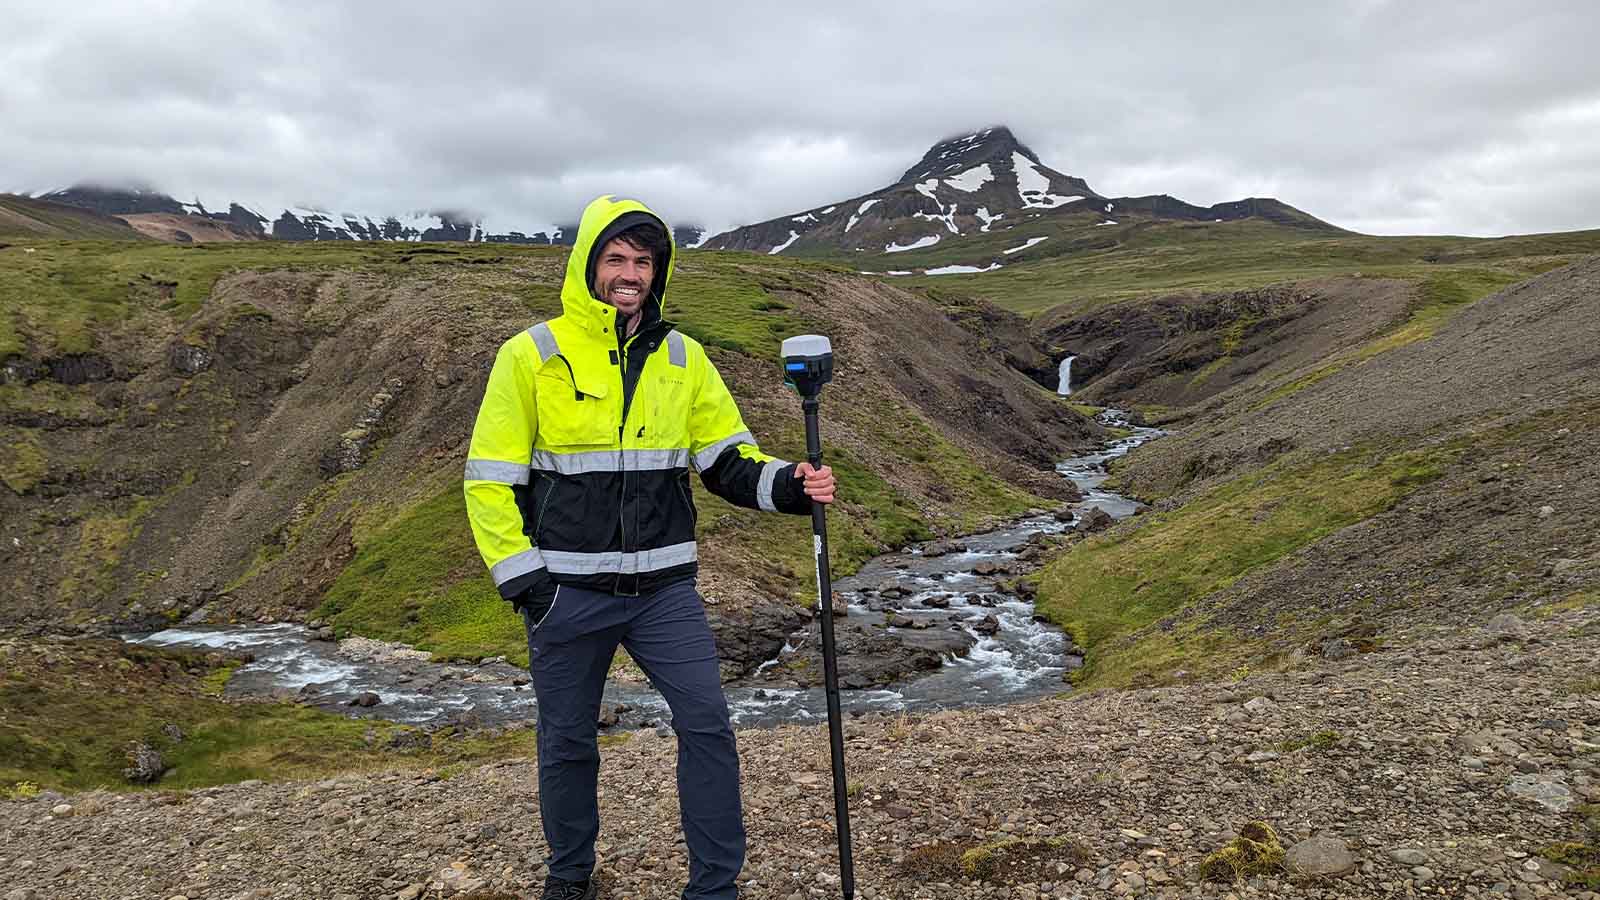 A man in a hi-vis yellow jacket is standing on a rocky landscape in Iceland, holding surveying equipment